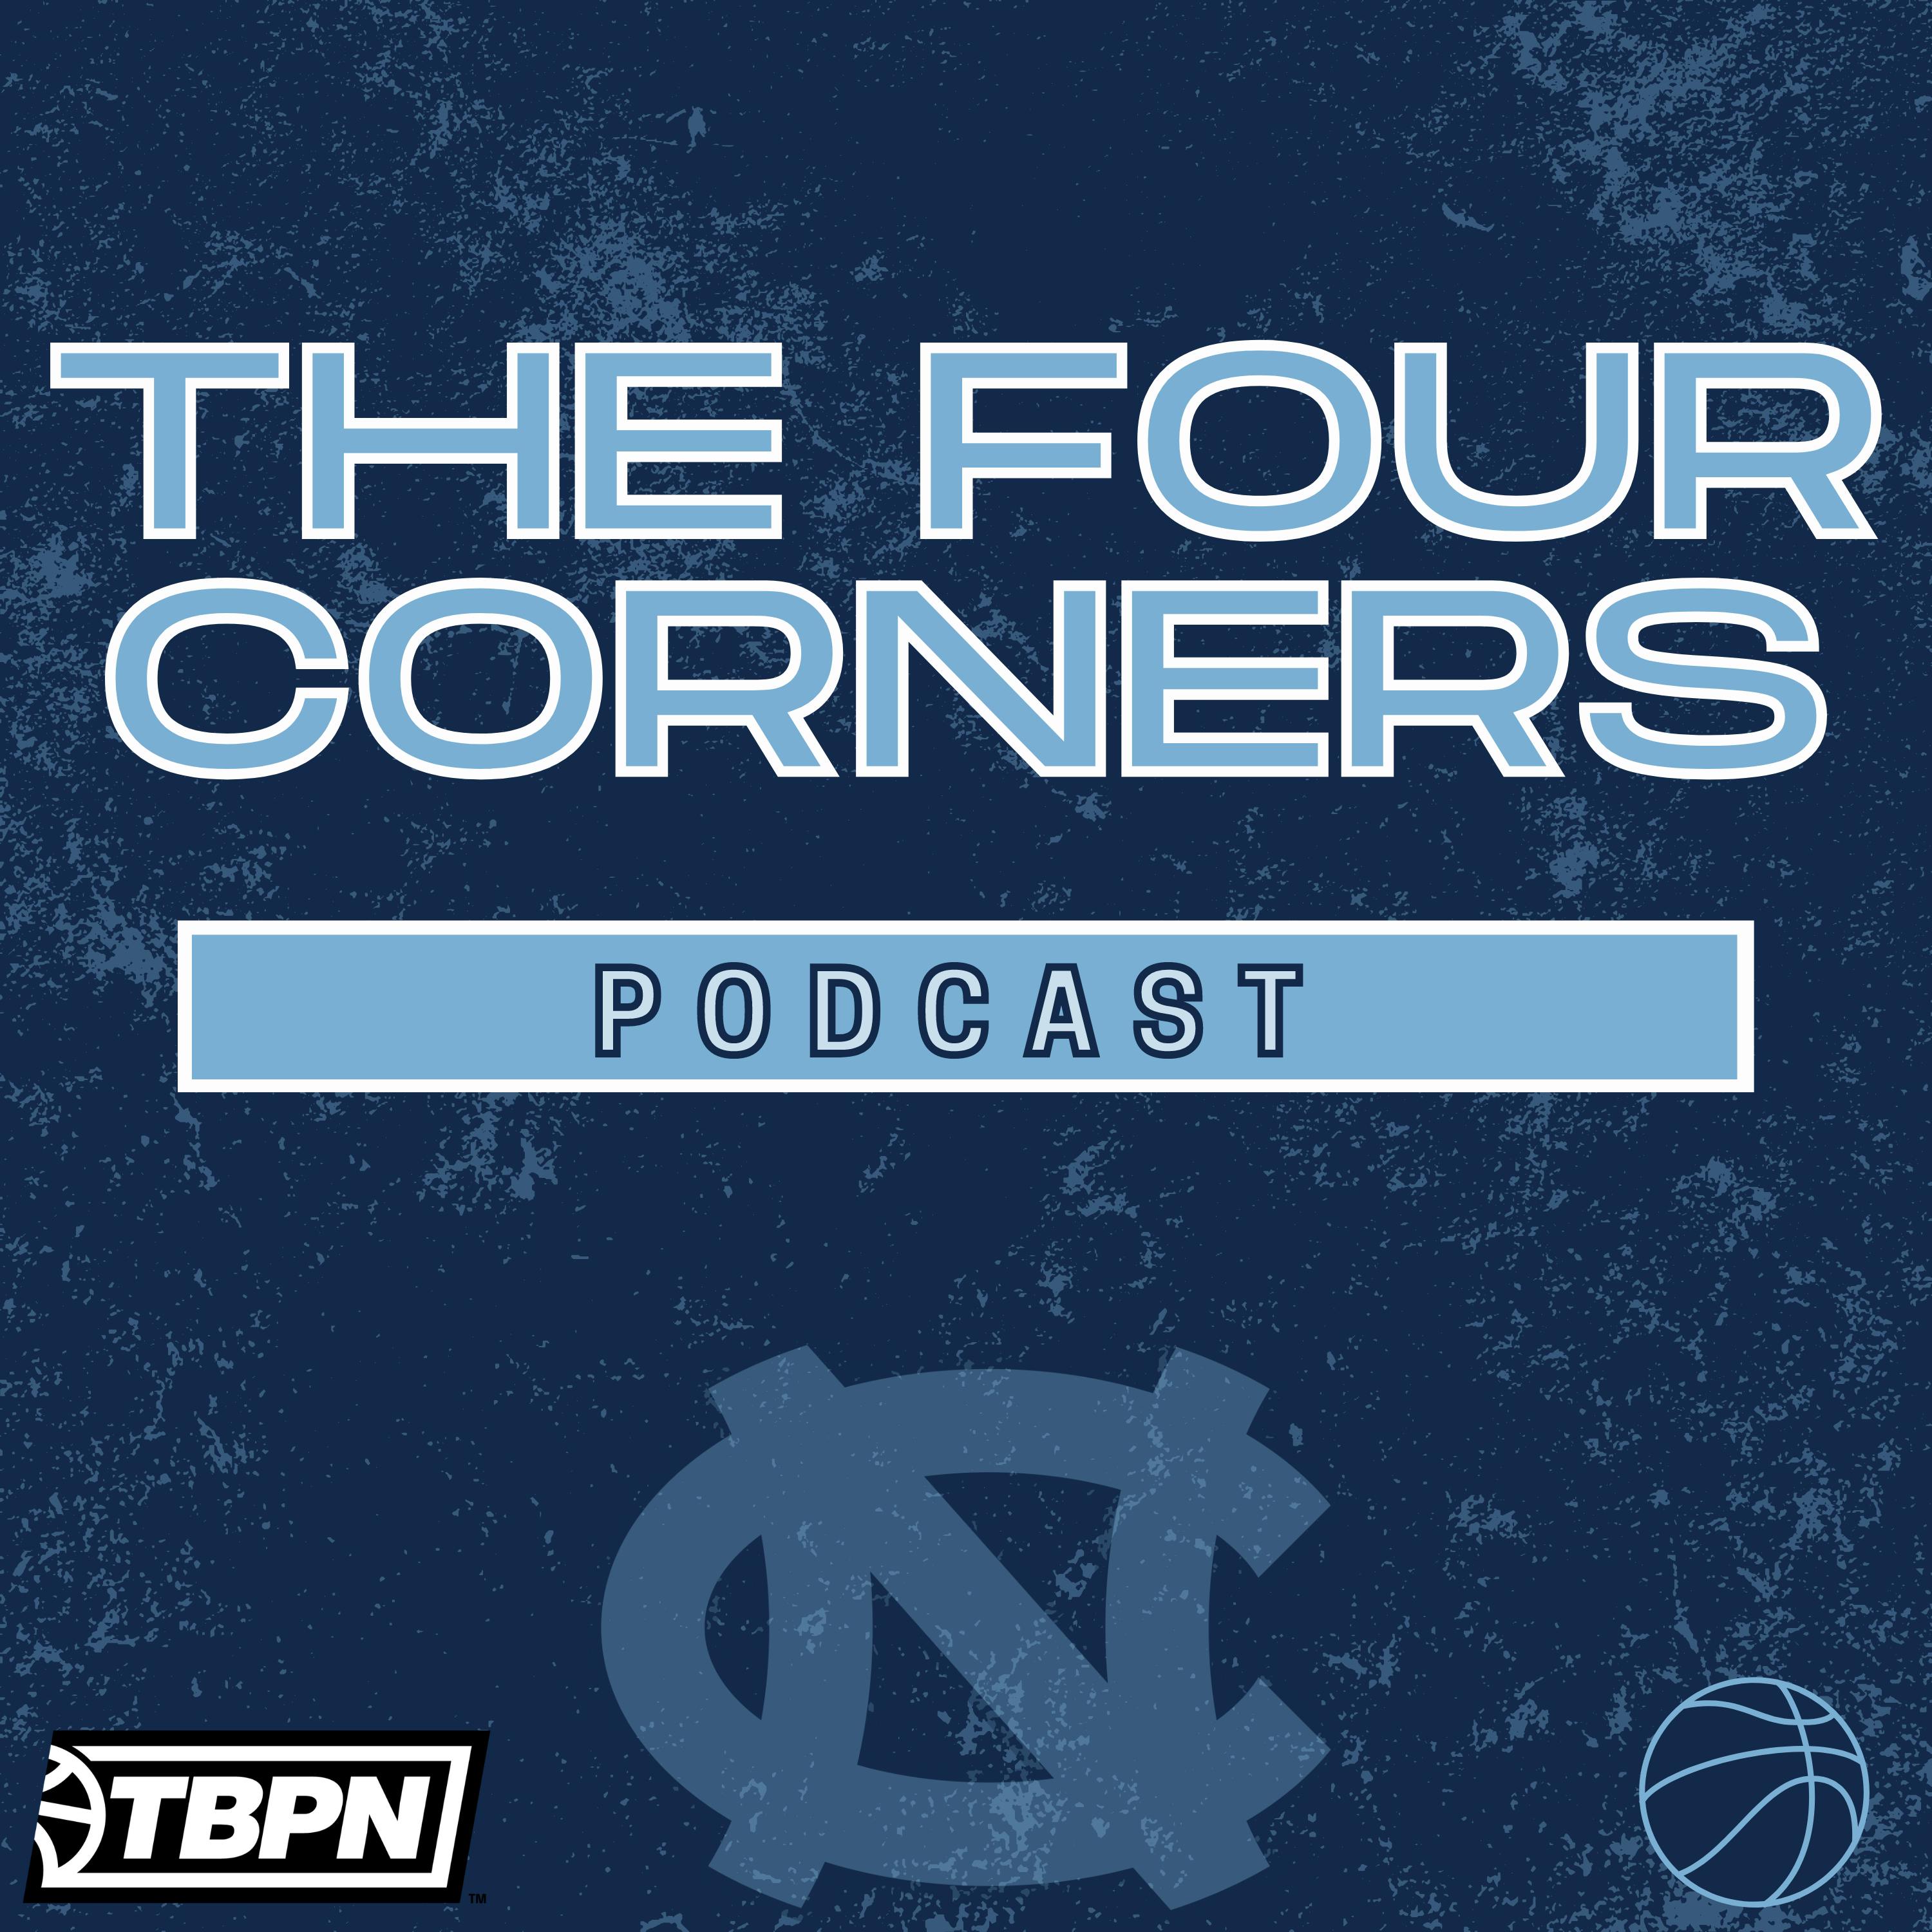 Podcast: The Four Corners - Michael Norwood Interview